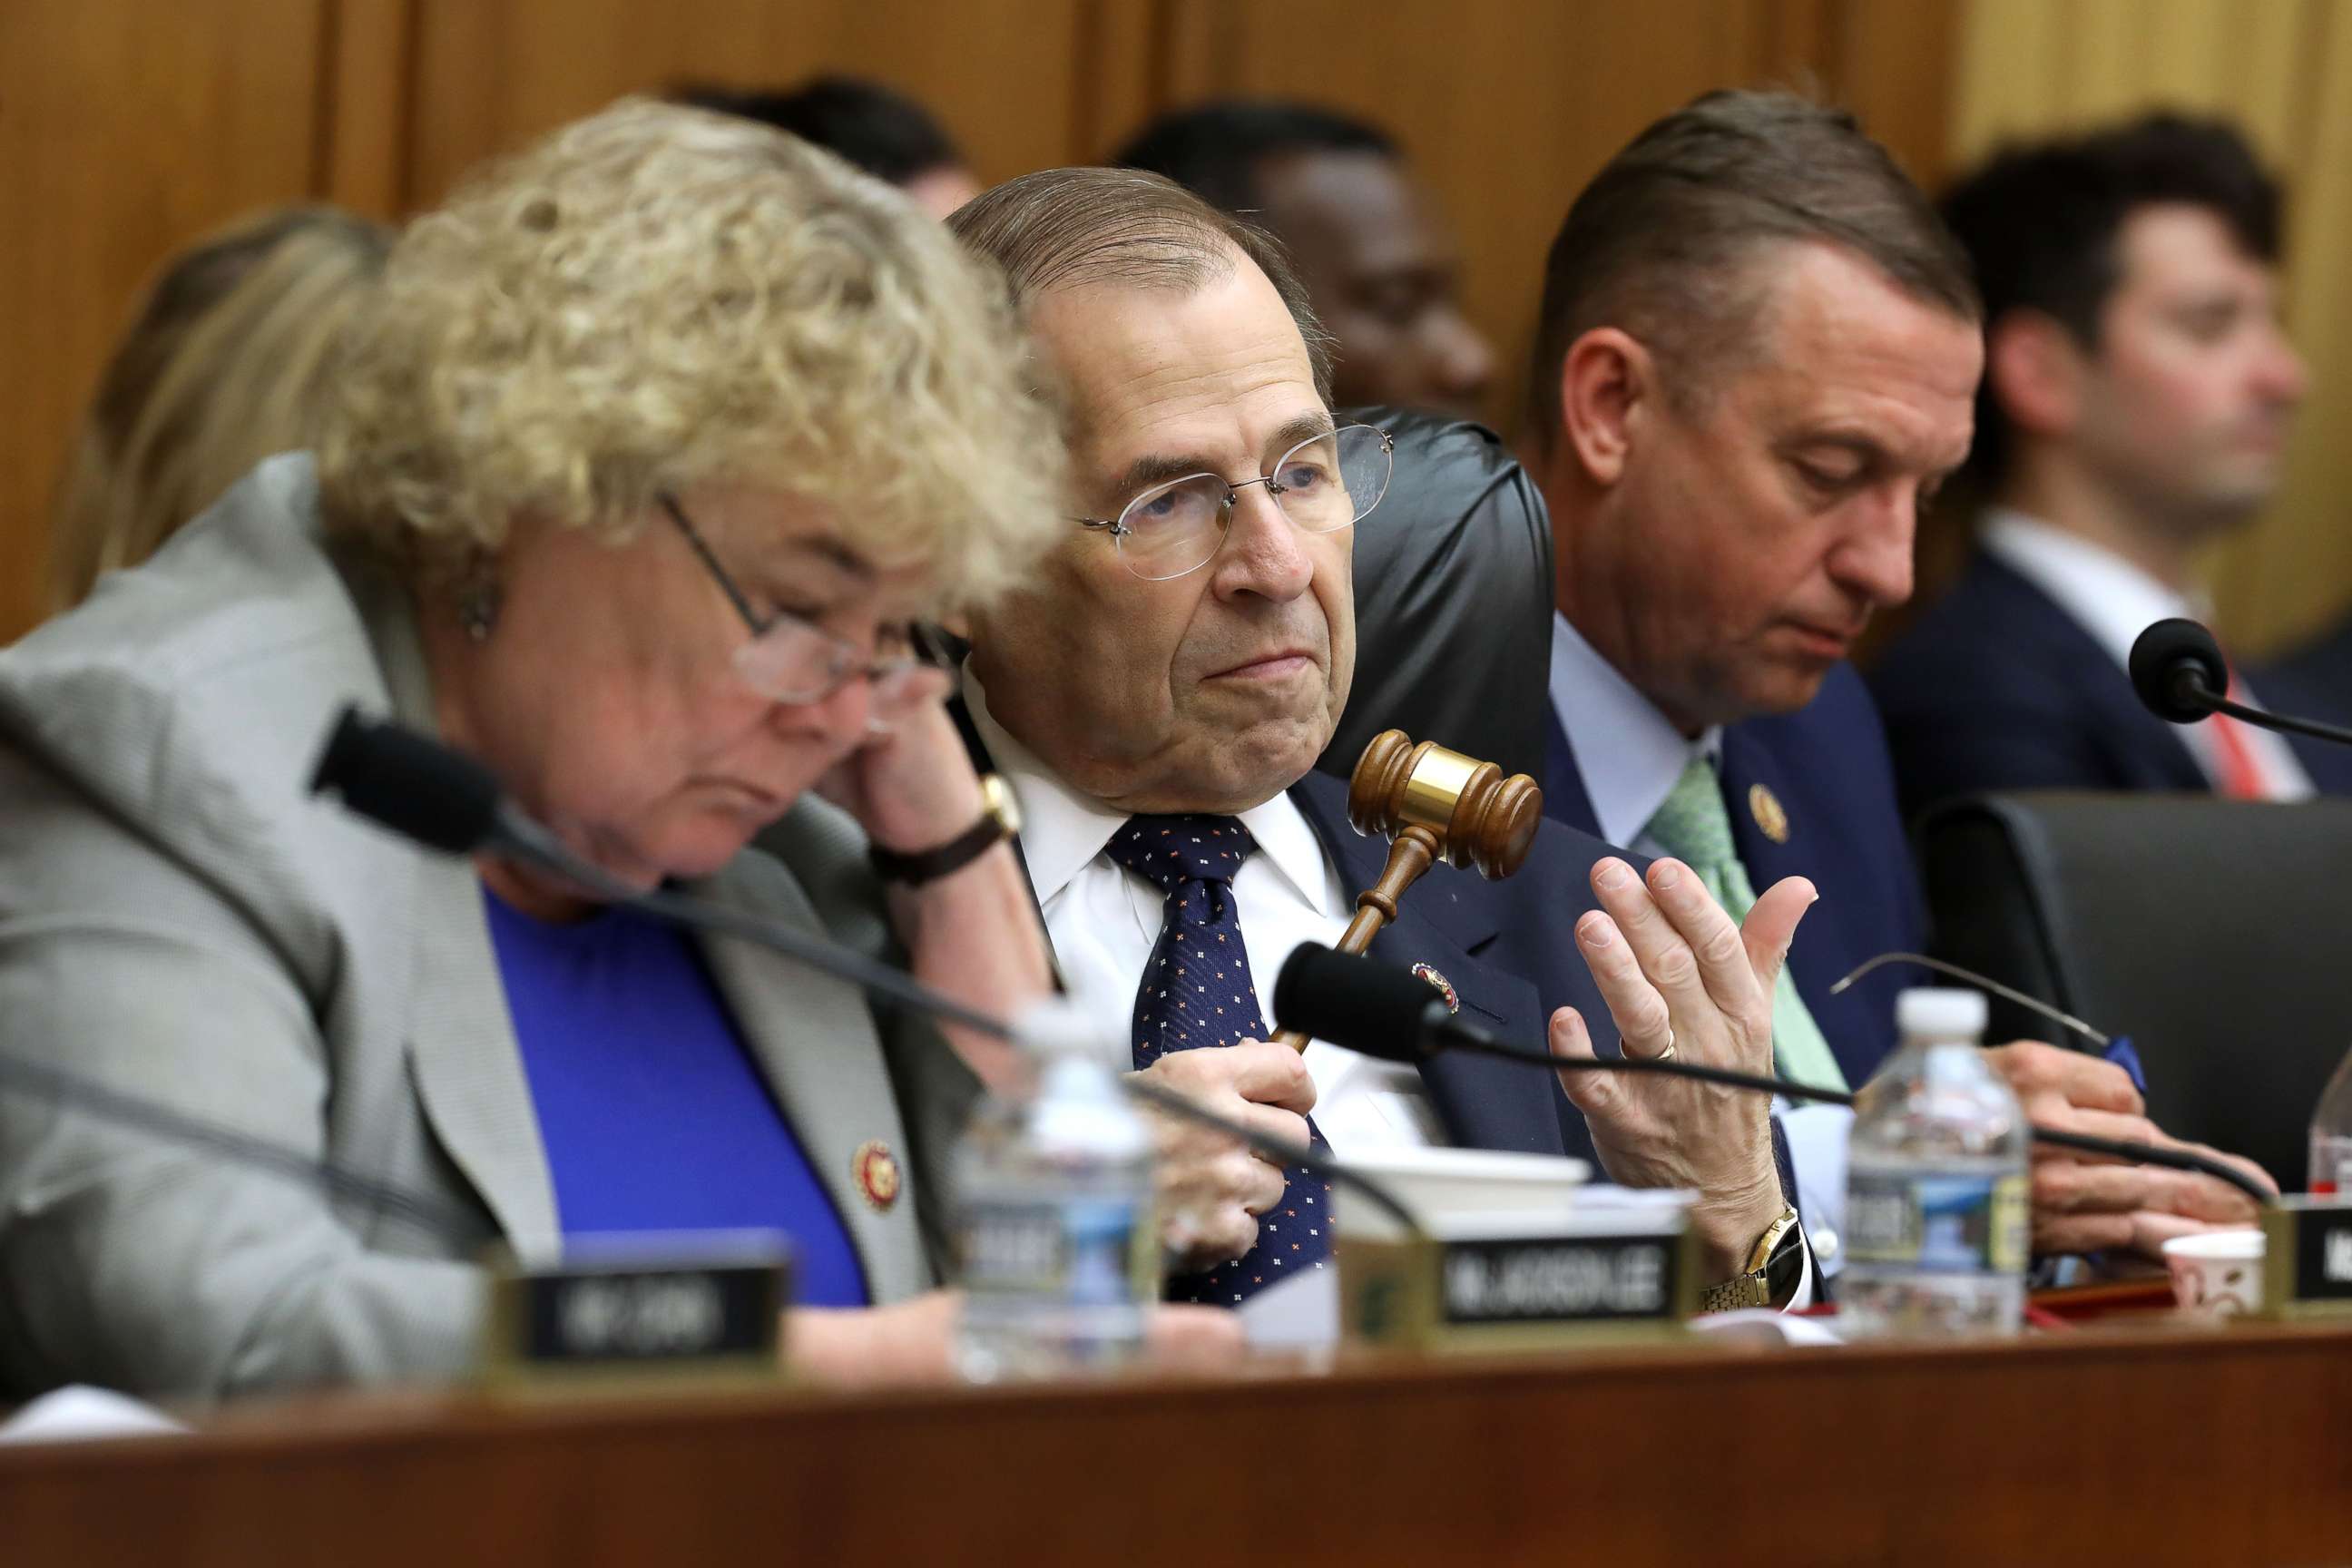 PHOTO: House Judiciary Committee Chairman Jerrold Nadler presides over a hearing  in the Rayburn House Office Building on Capitol Hill, May 08, 2019, in Washington.